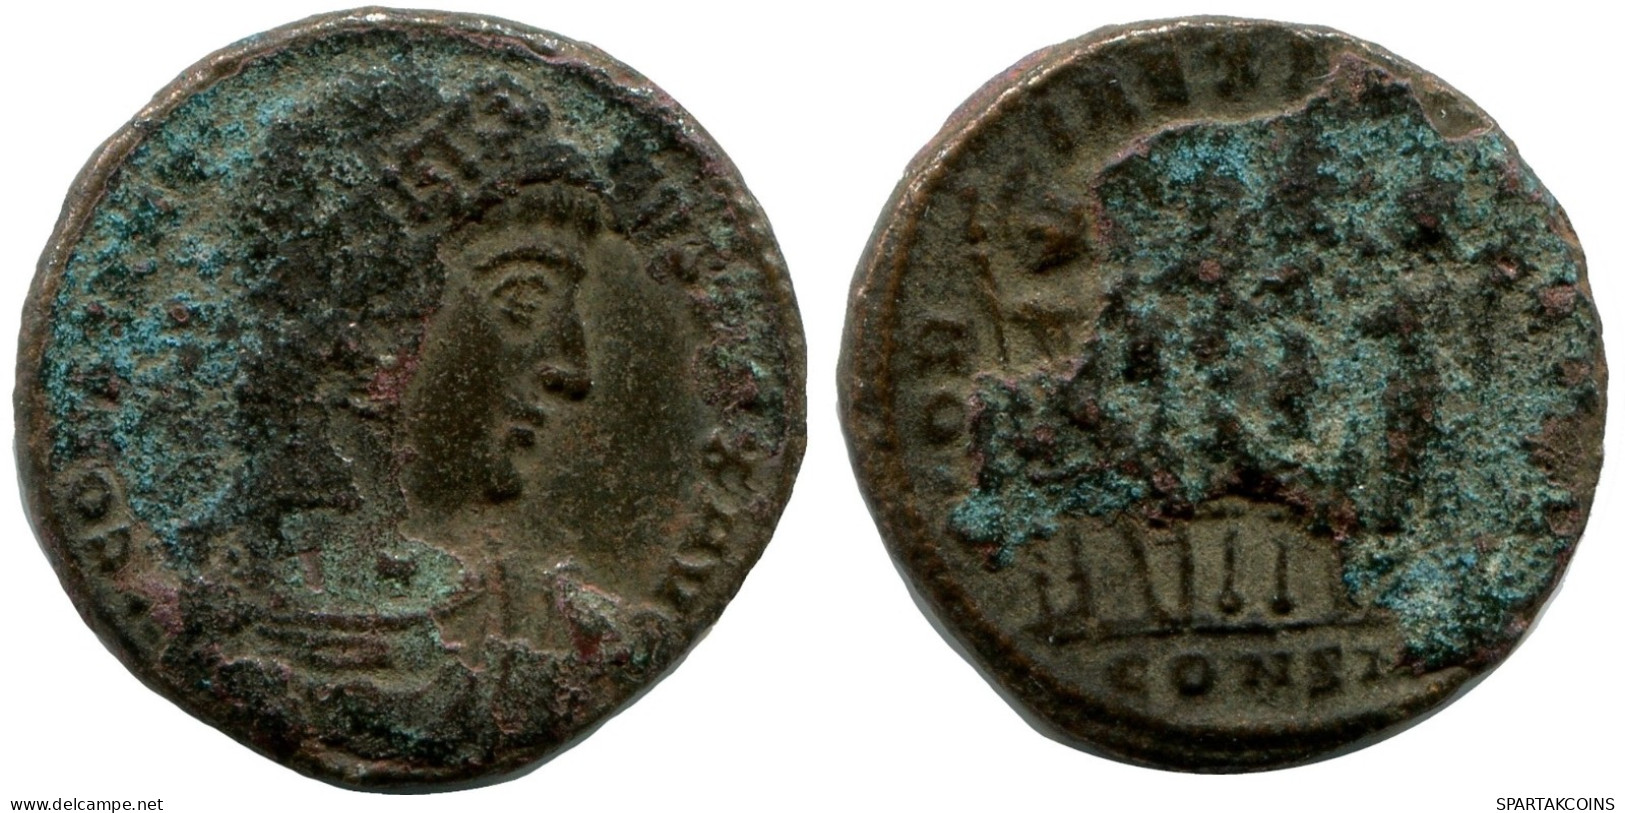 CONSTANTINE I CONSTANTINOPLE FROM THE ROYAL ONTARIO MUSEUM #ANC10771.14.D.A - Der Christlischen Kaiser (307 / 363)